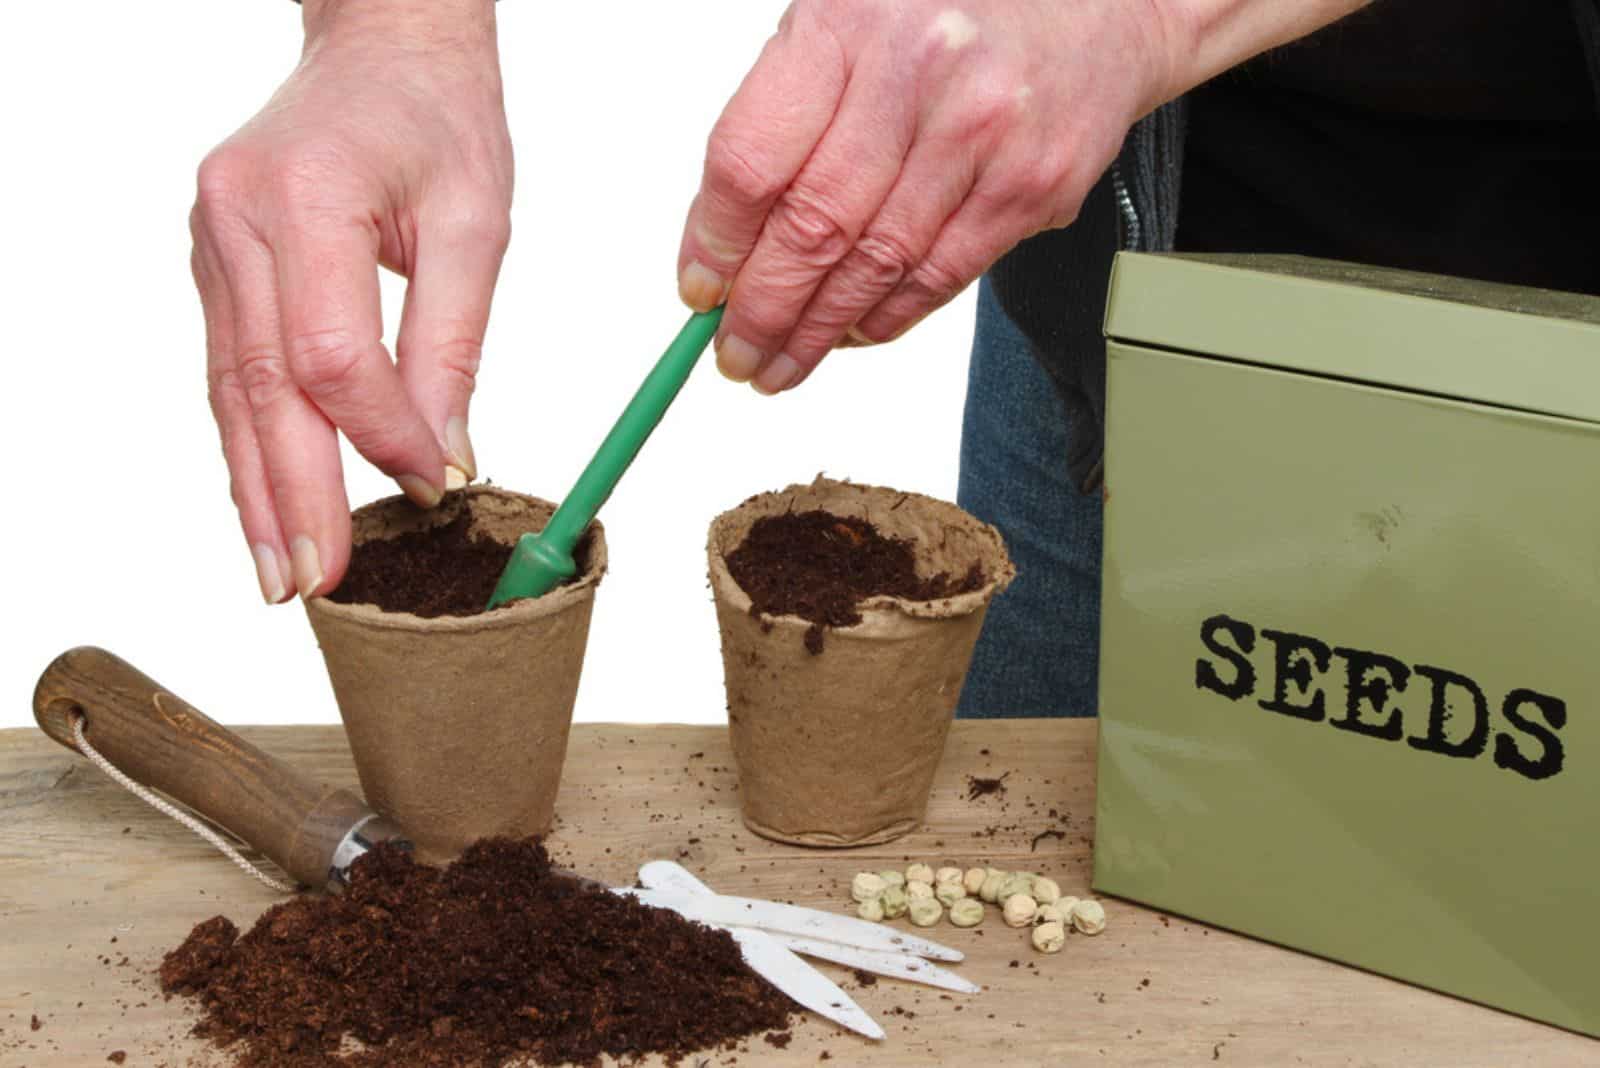 Hands planting pea seeds into pots on a potting bench